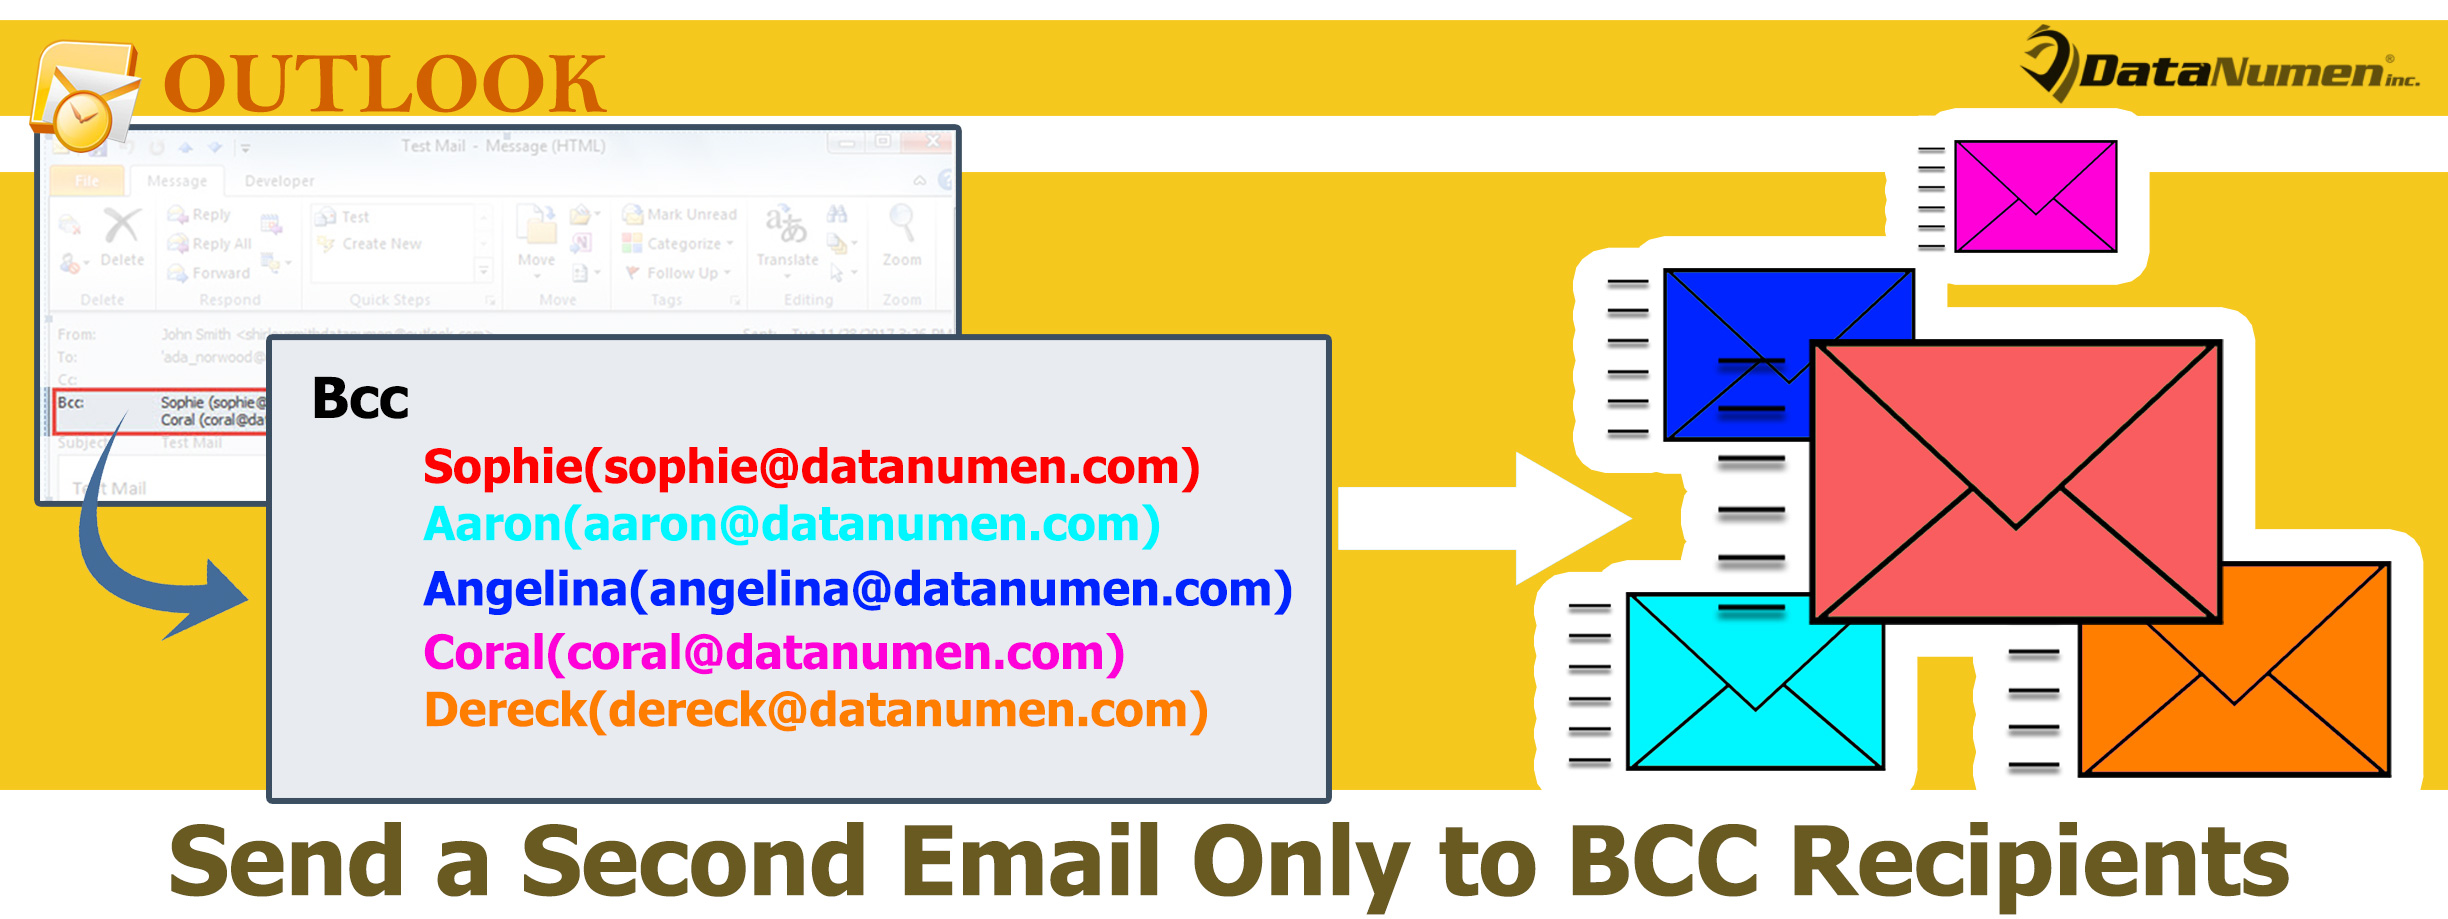 Send a Second Email Only to the BCC Recipients of an Outlook Email